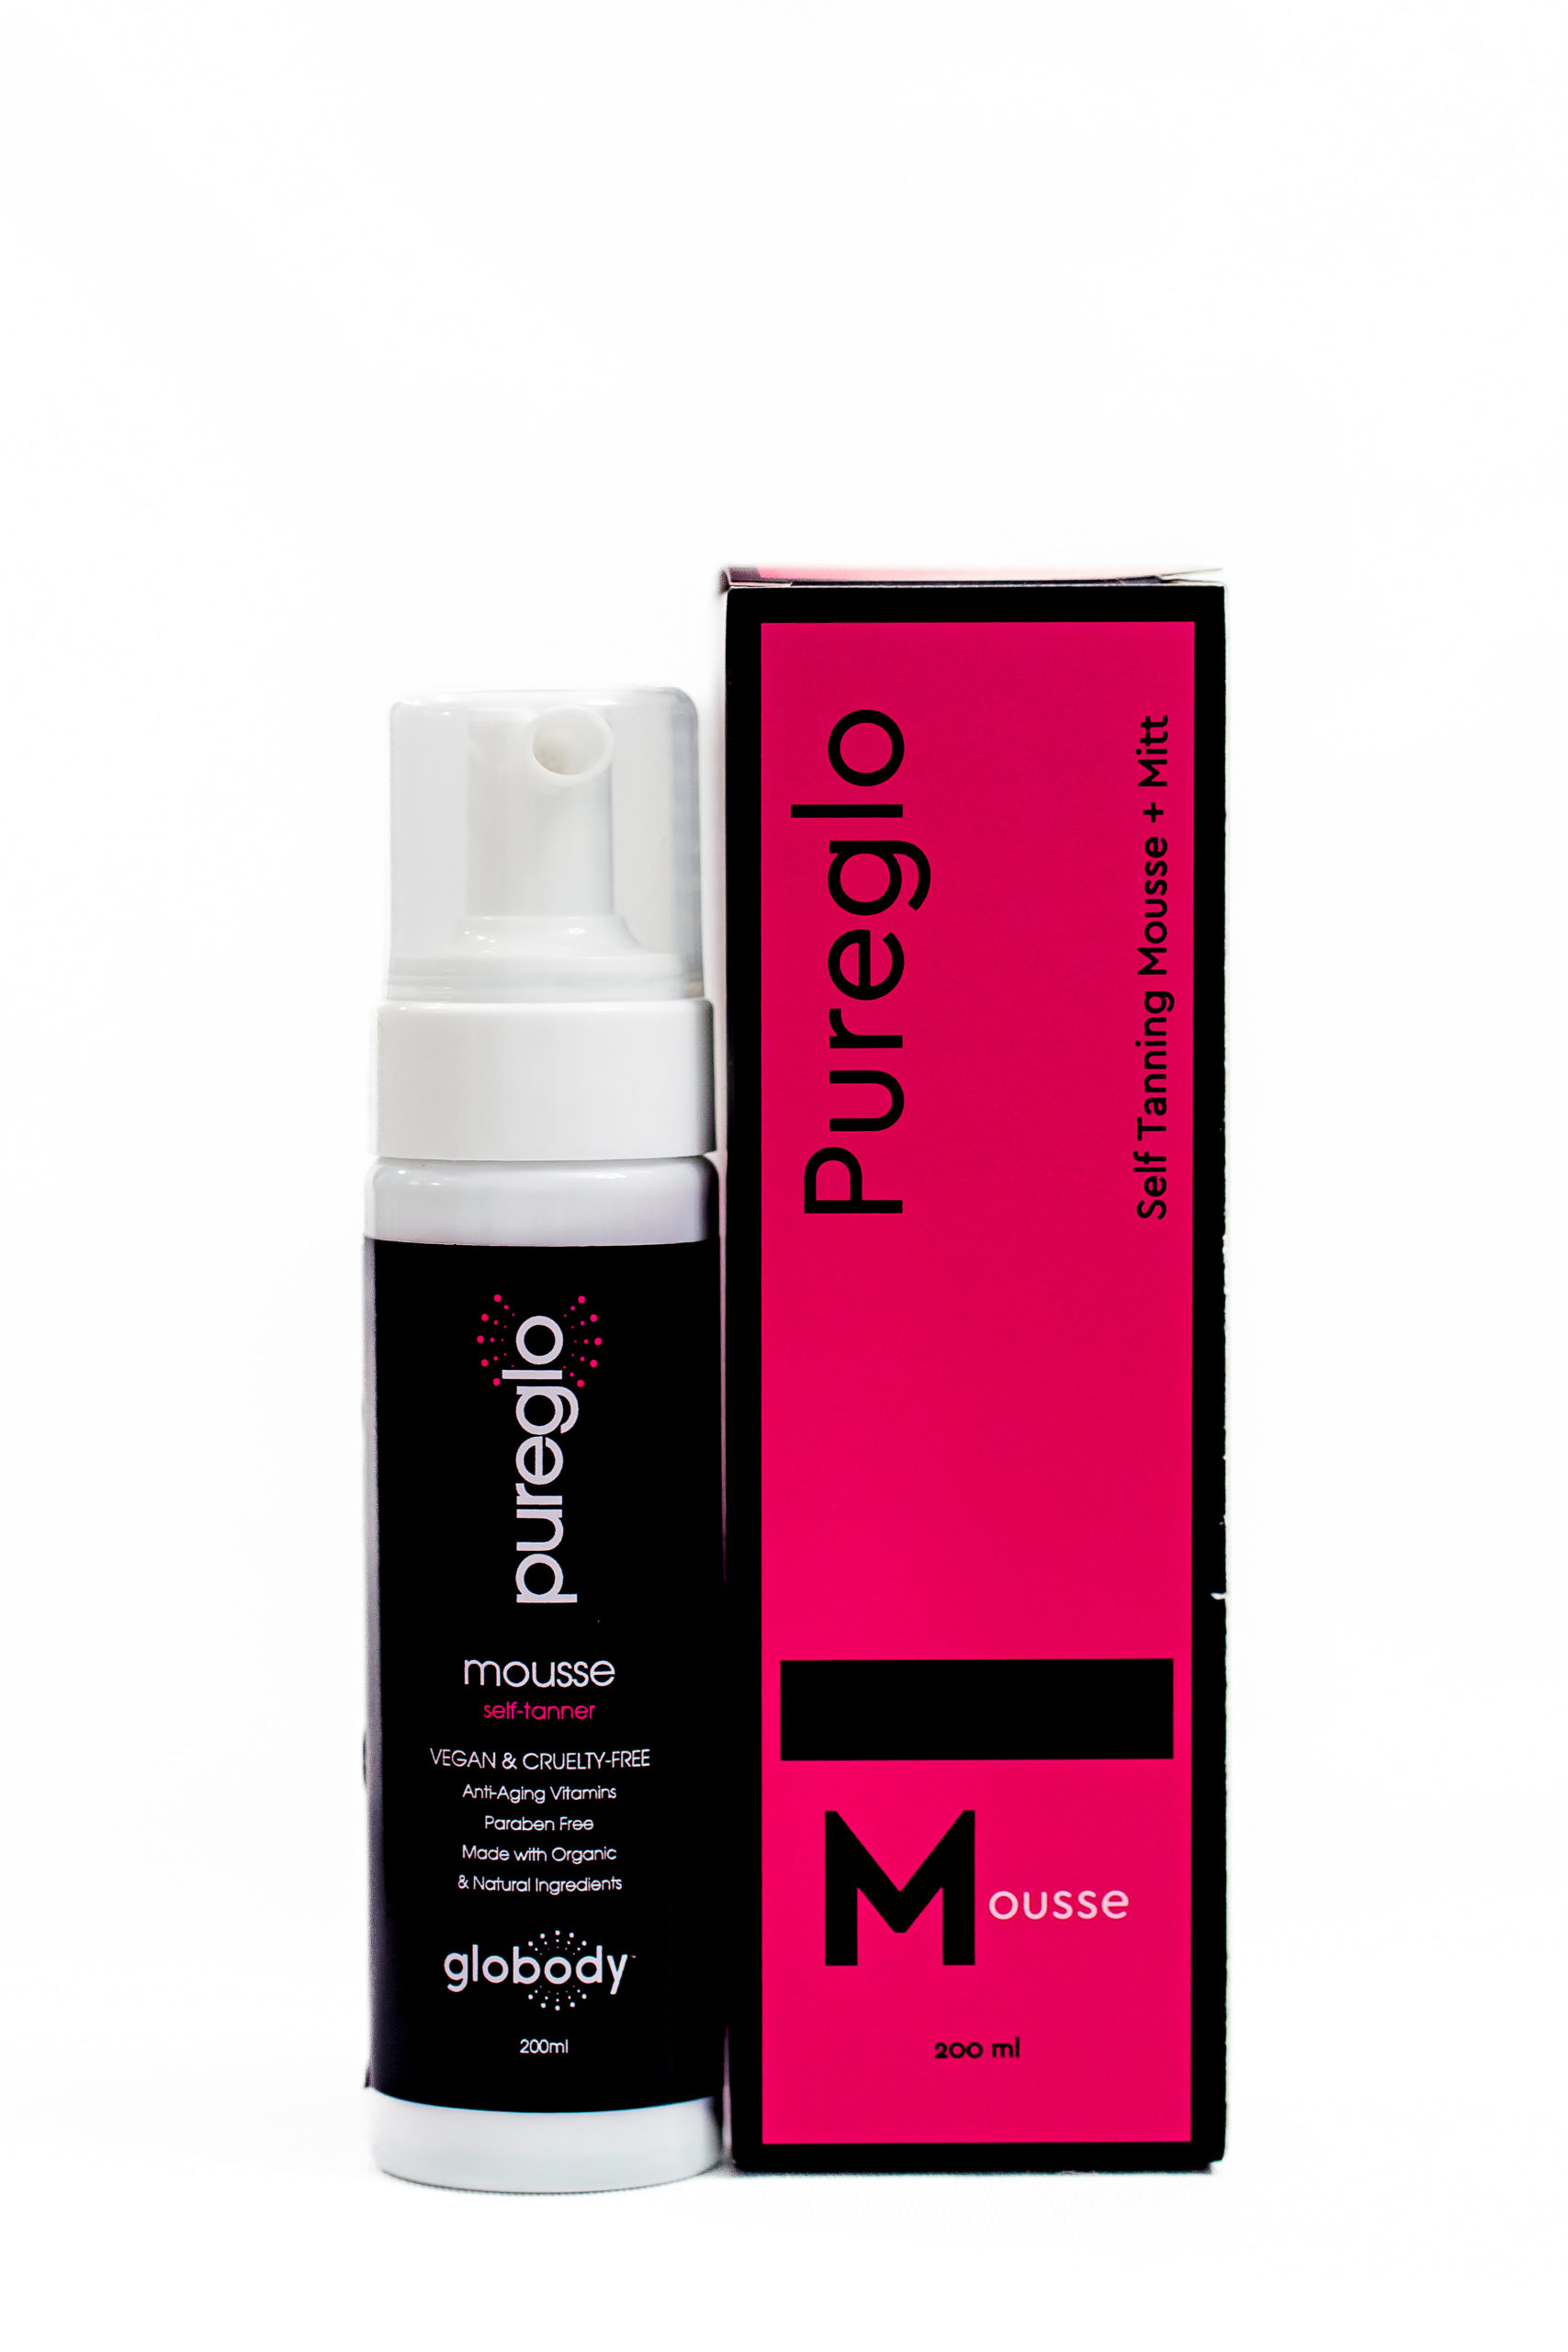 pureglo-self-tanning-mousse-and-mitt